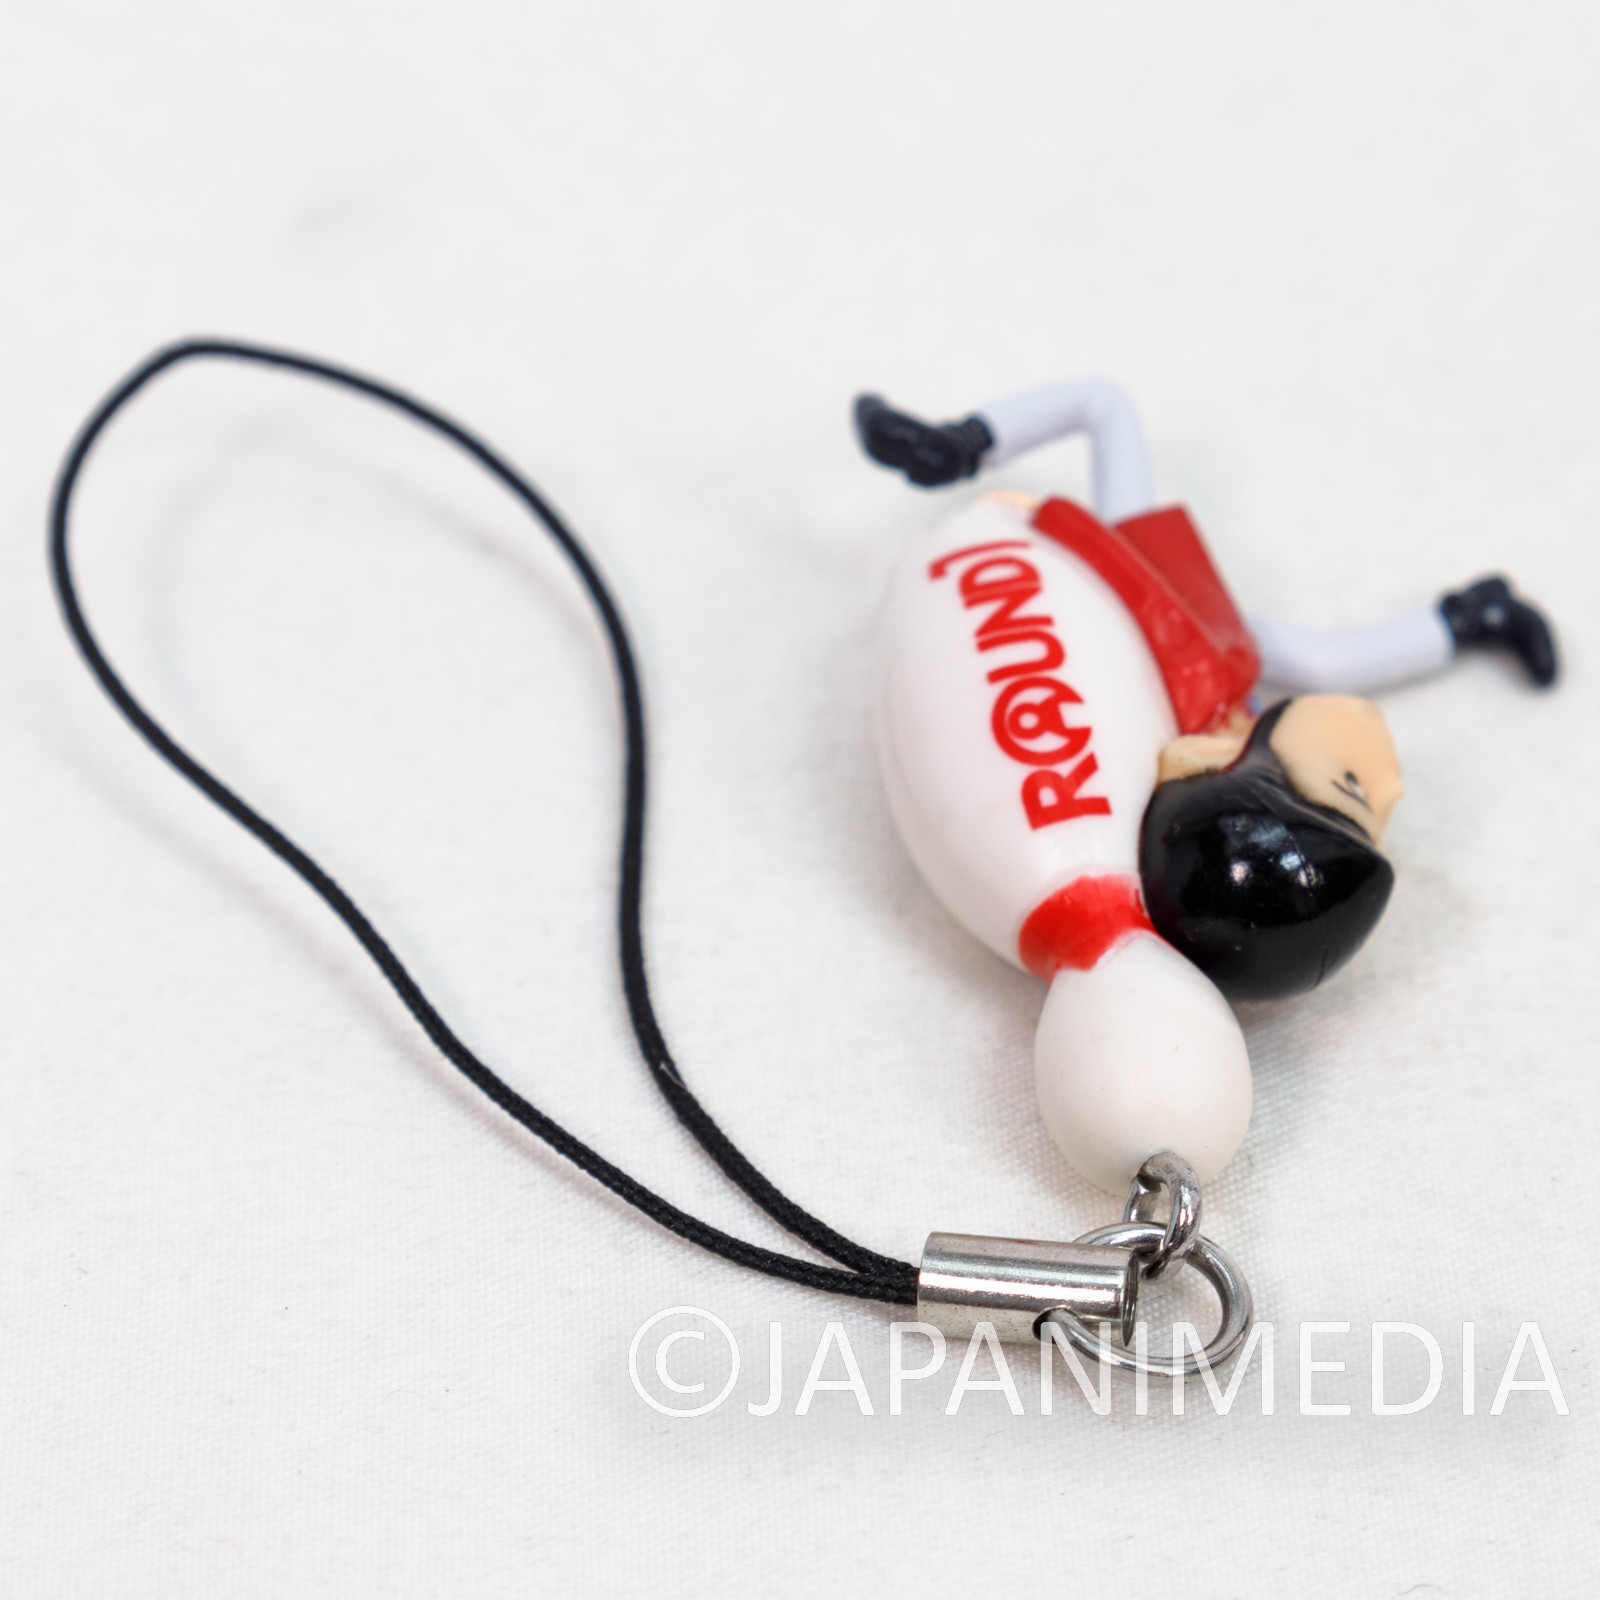 Lupin the Third with Bowling Pin Figure Strap #2 JAPAN ROUND 1